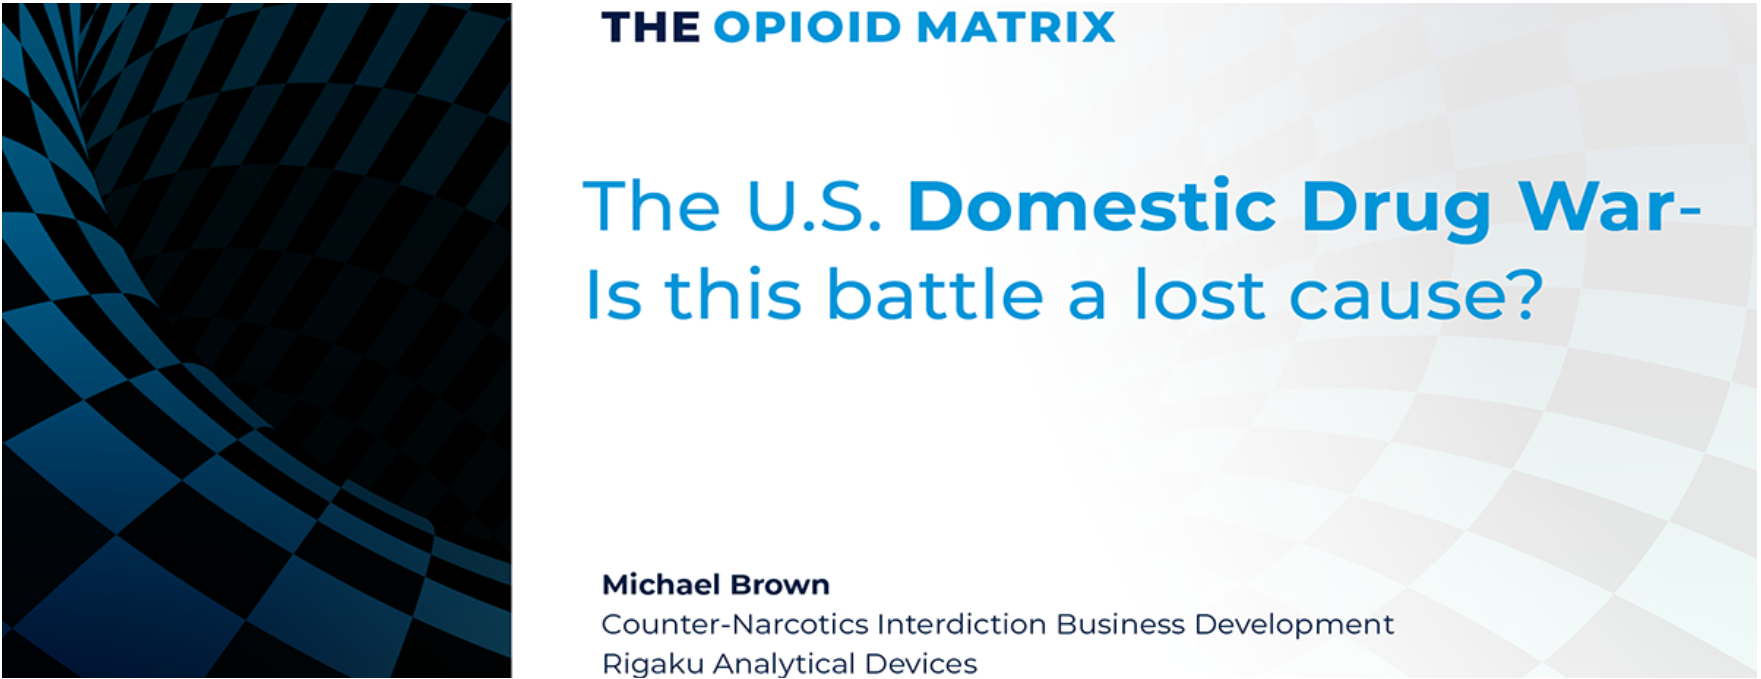 The Opioid Matrix: The U.S. Domestic Drug War-Is this battle a lost cause? 